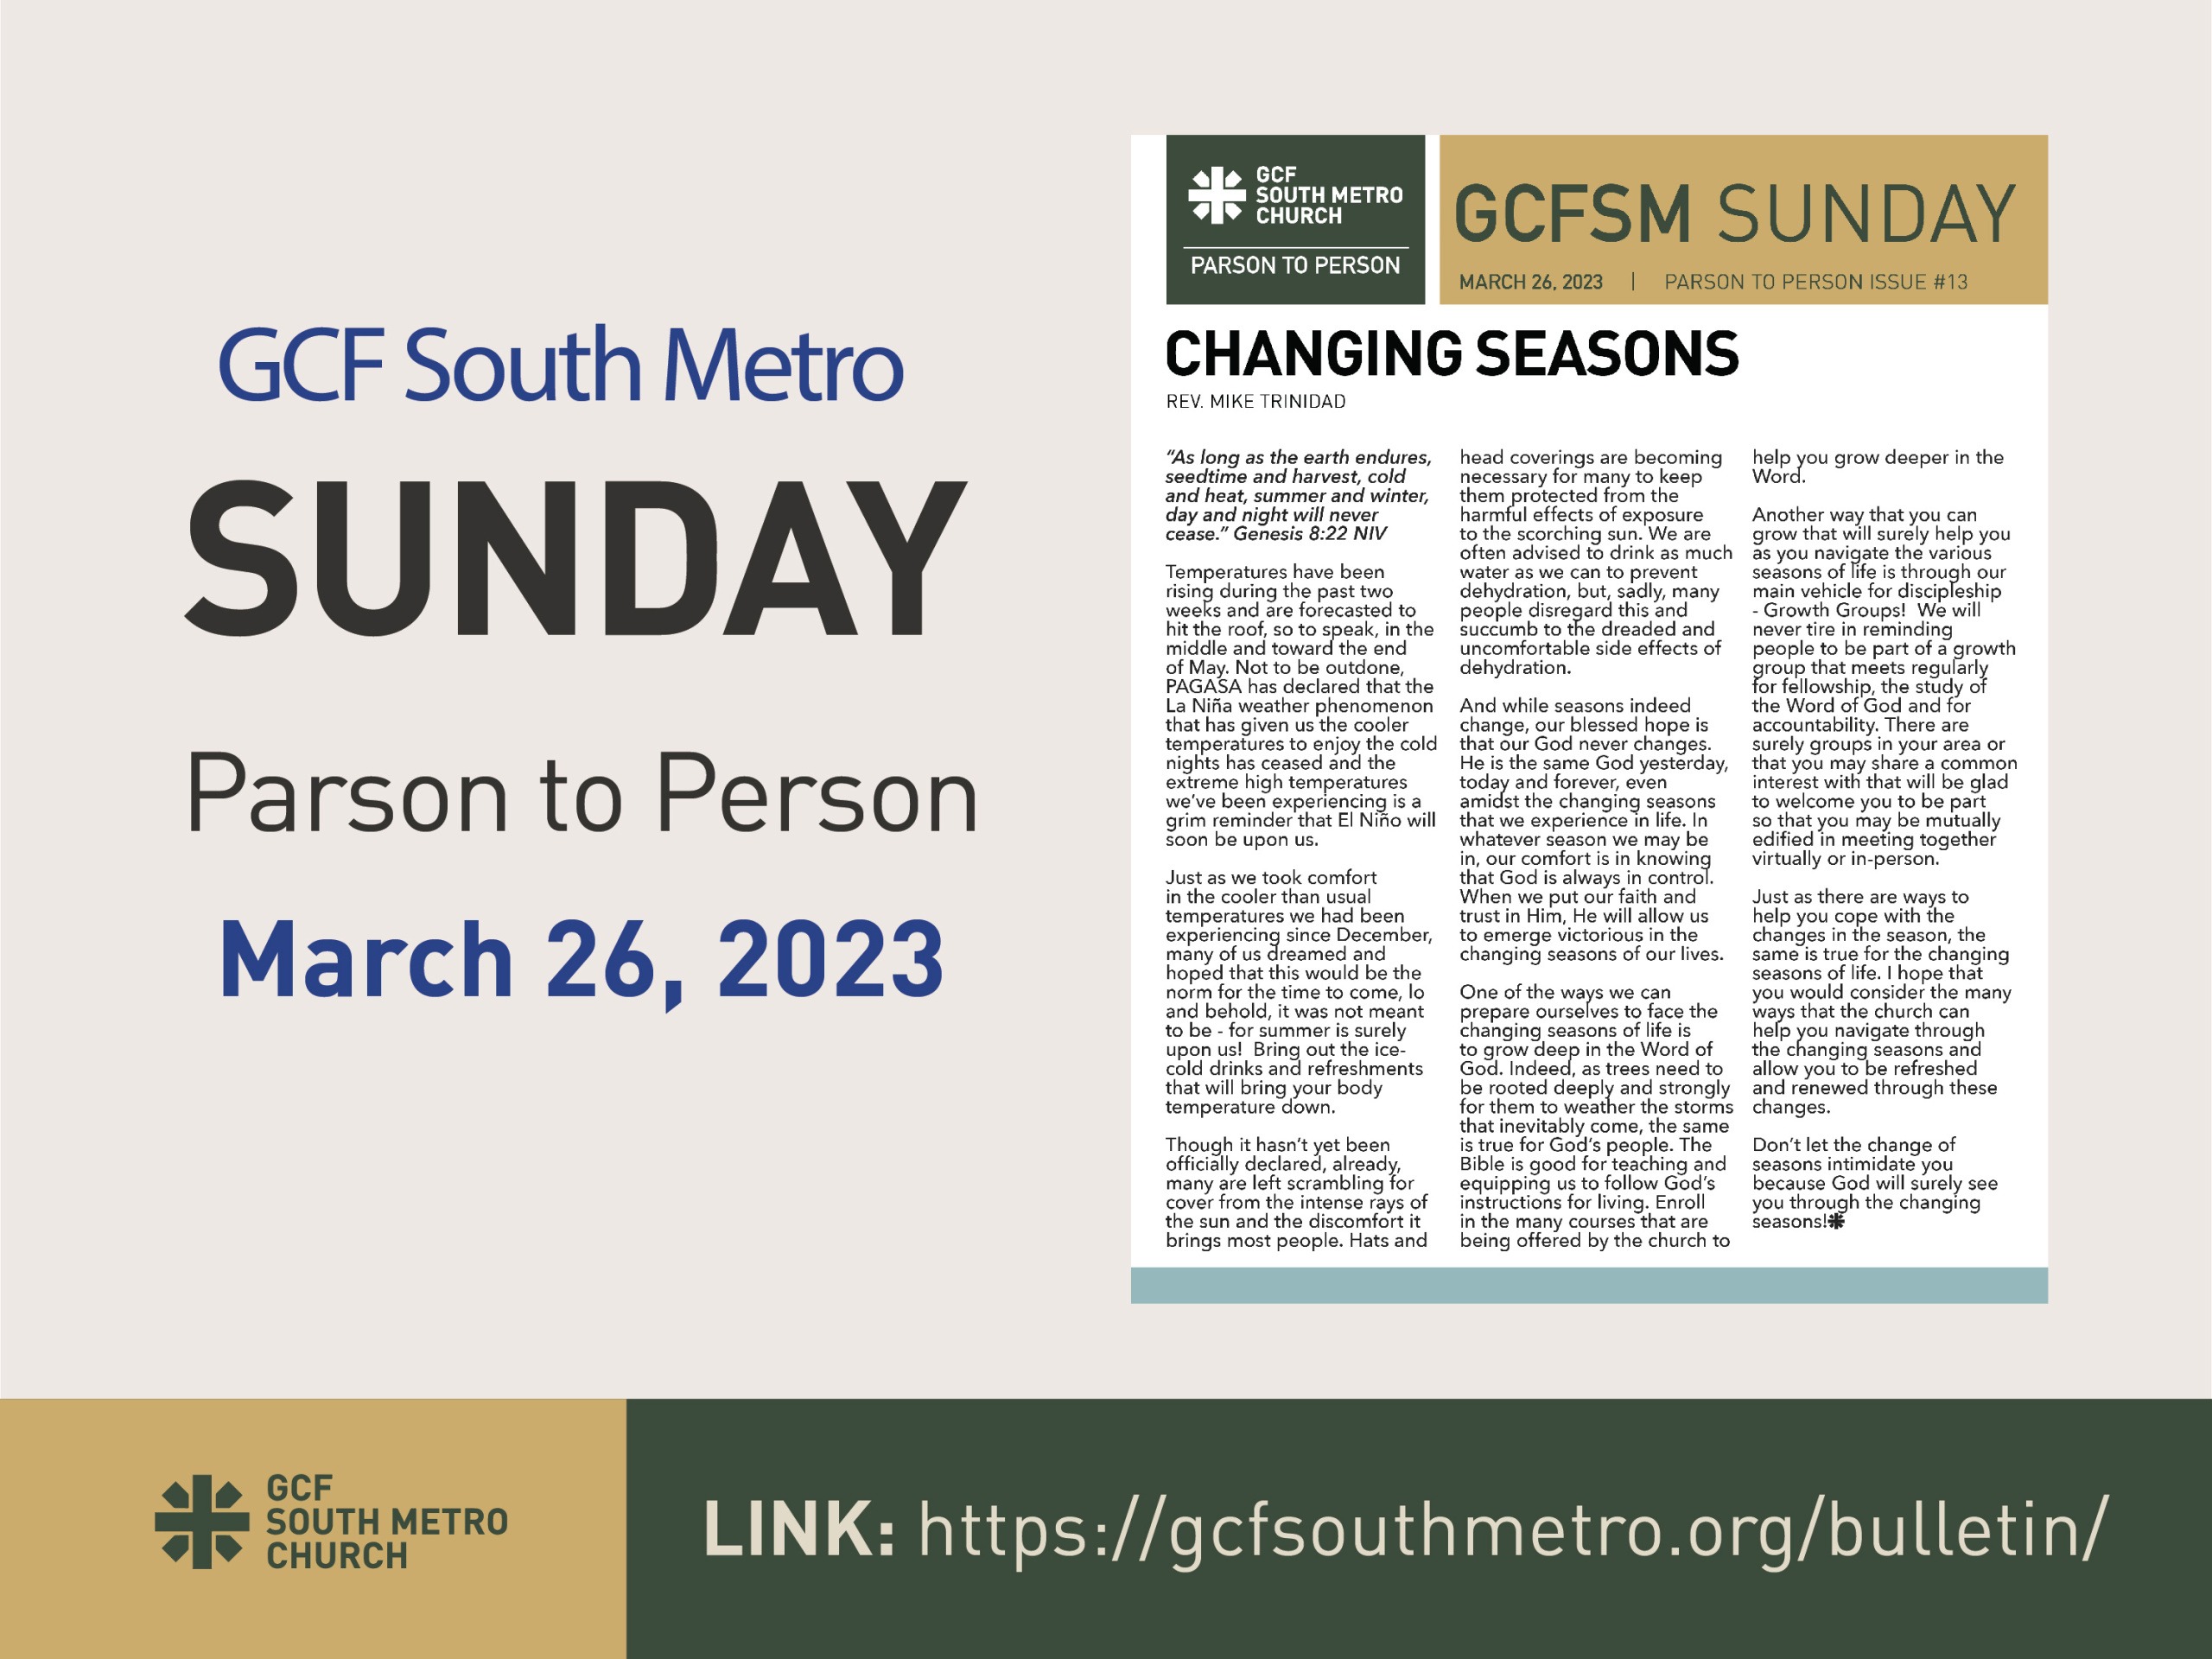 Sunday Bulletin – Parson to Person, March 26, 2023